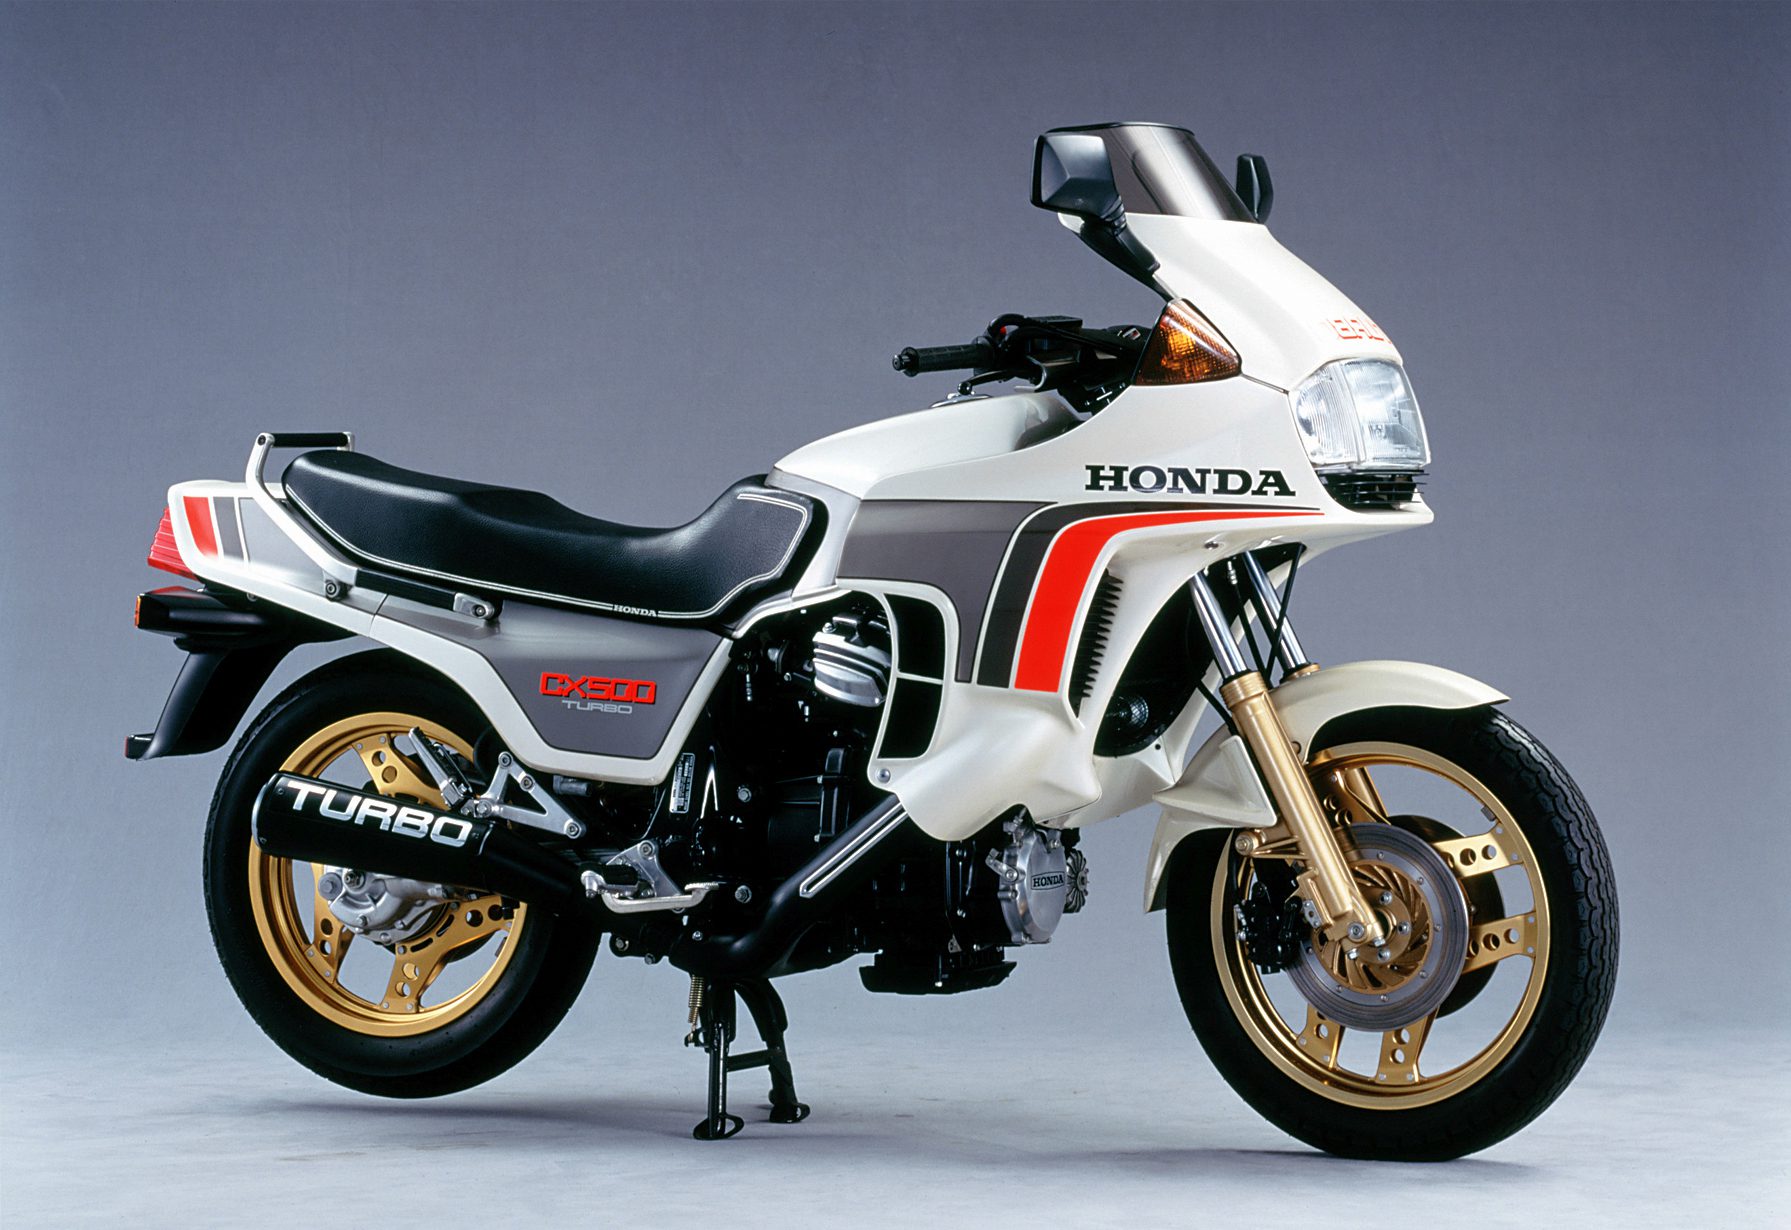 The Honda CX500 Turbo motorcycle in a studio